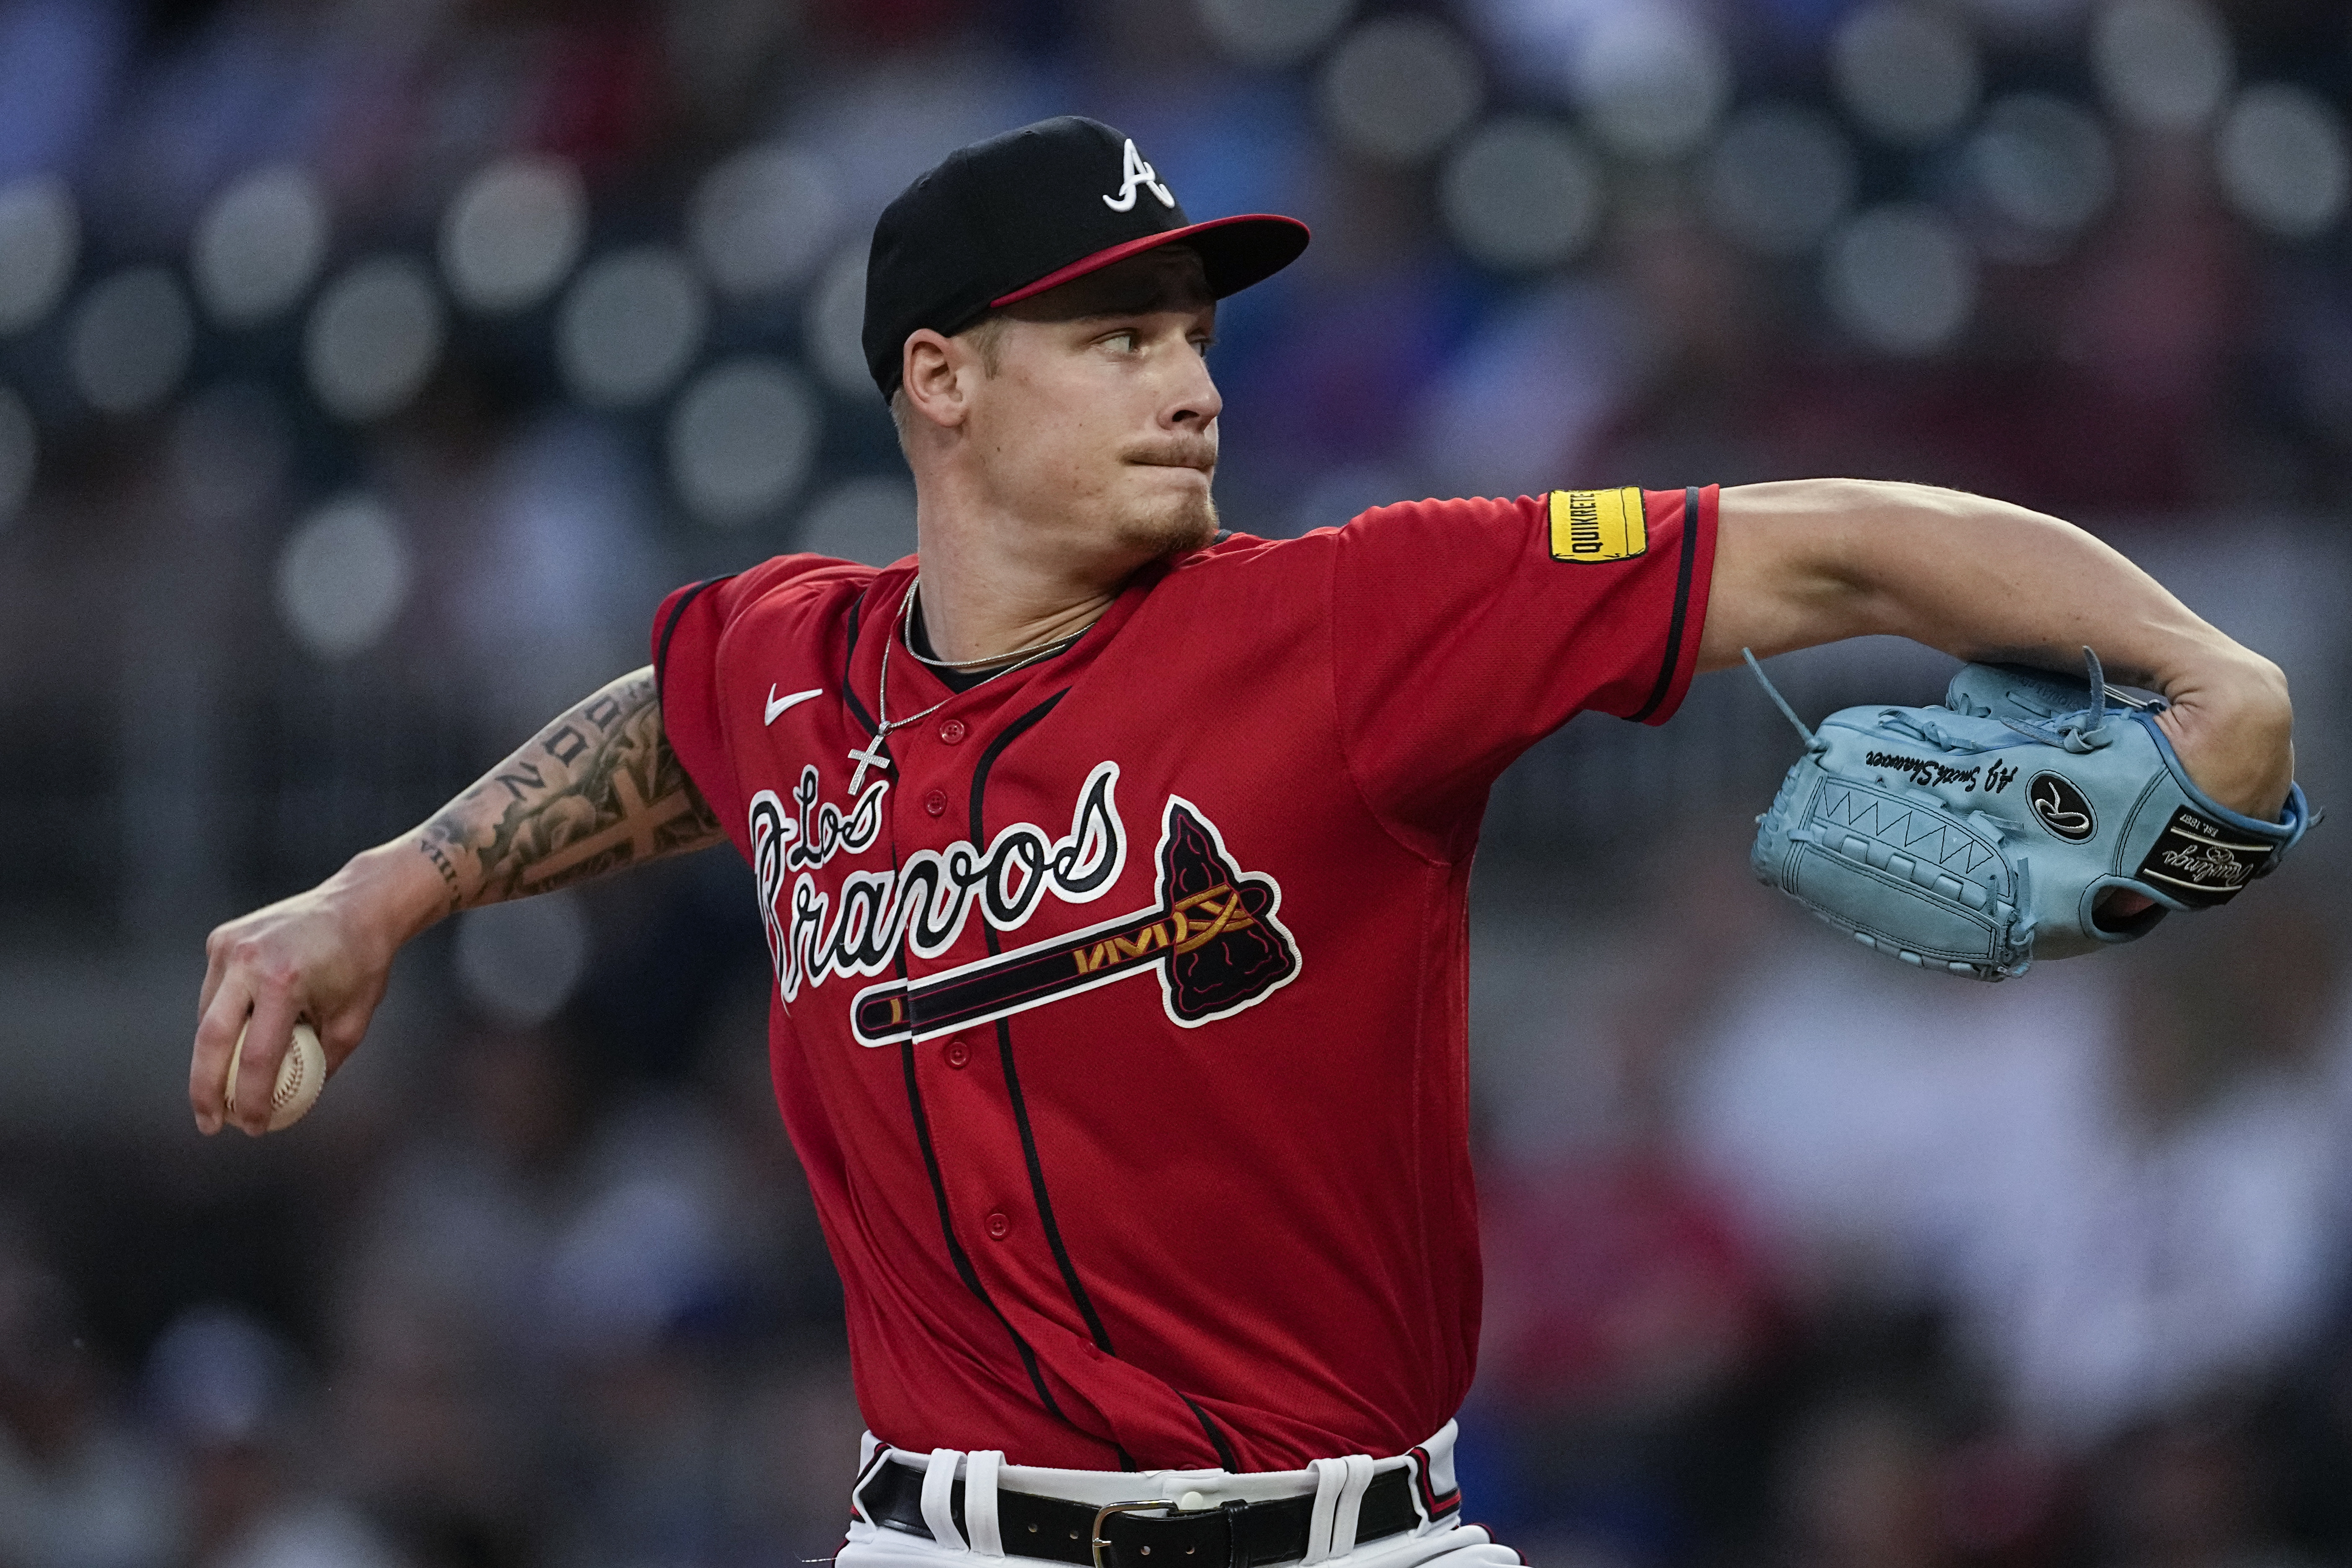 Braves don't have Craig Kimbrel anymore, but in A.J. Minter they